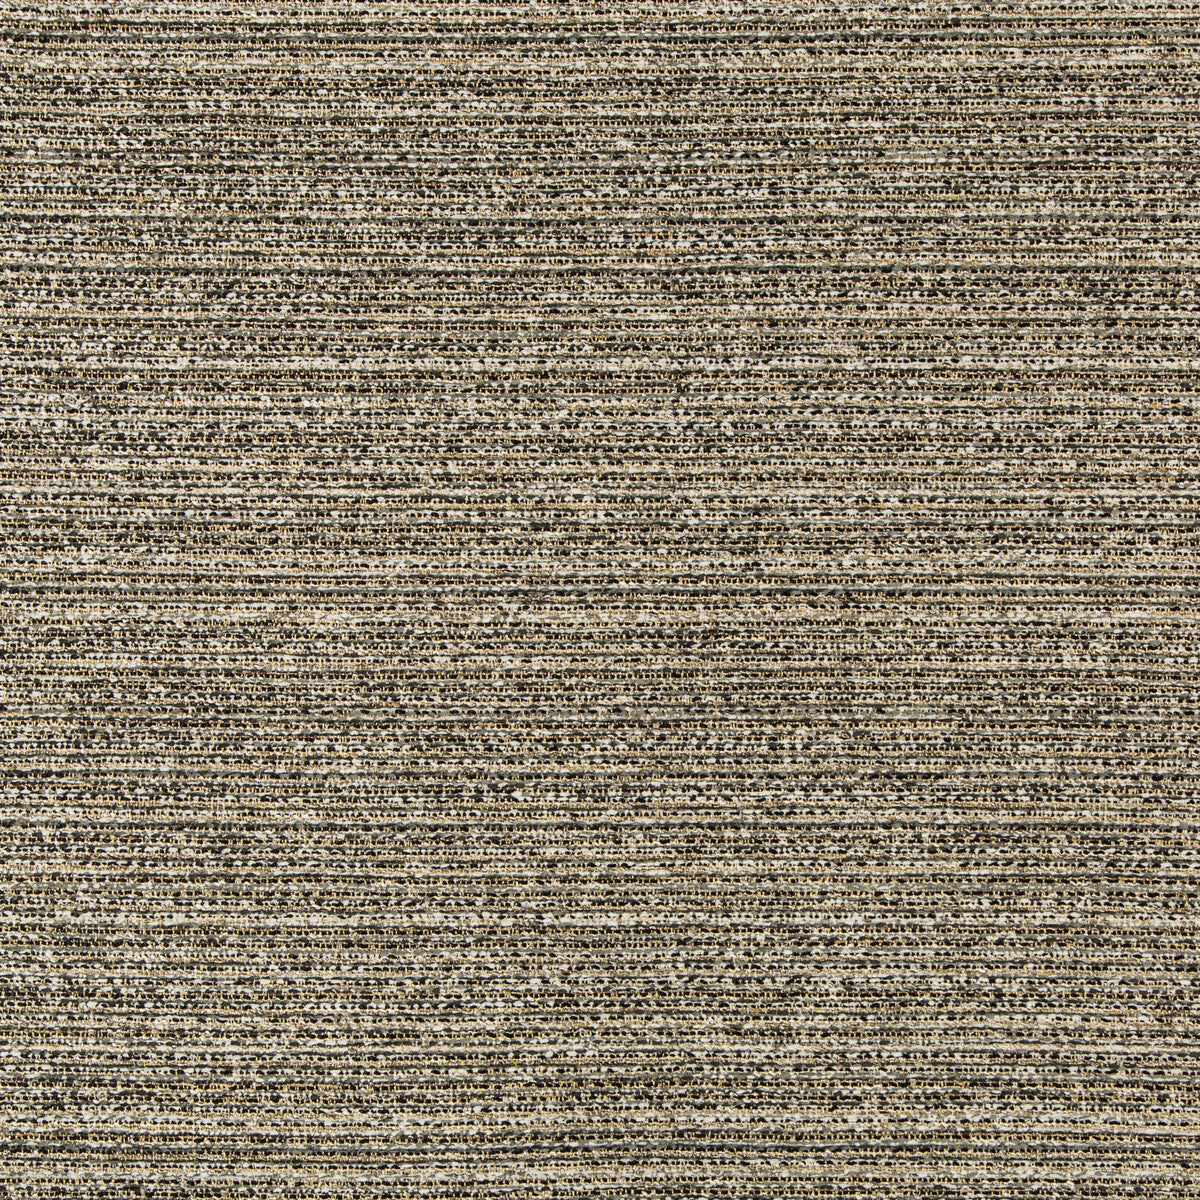 Kravet Design fabric in 36079-821 color - pattern 36079.821.0 - by Kravet Design in the Inside Out Performance Fabrics collection